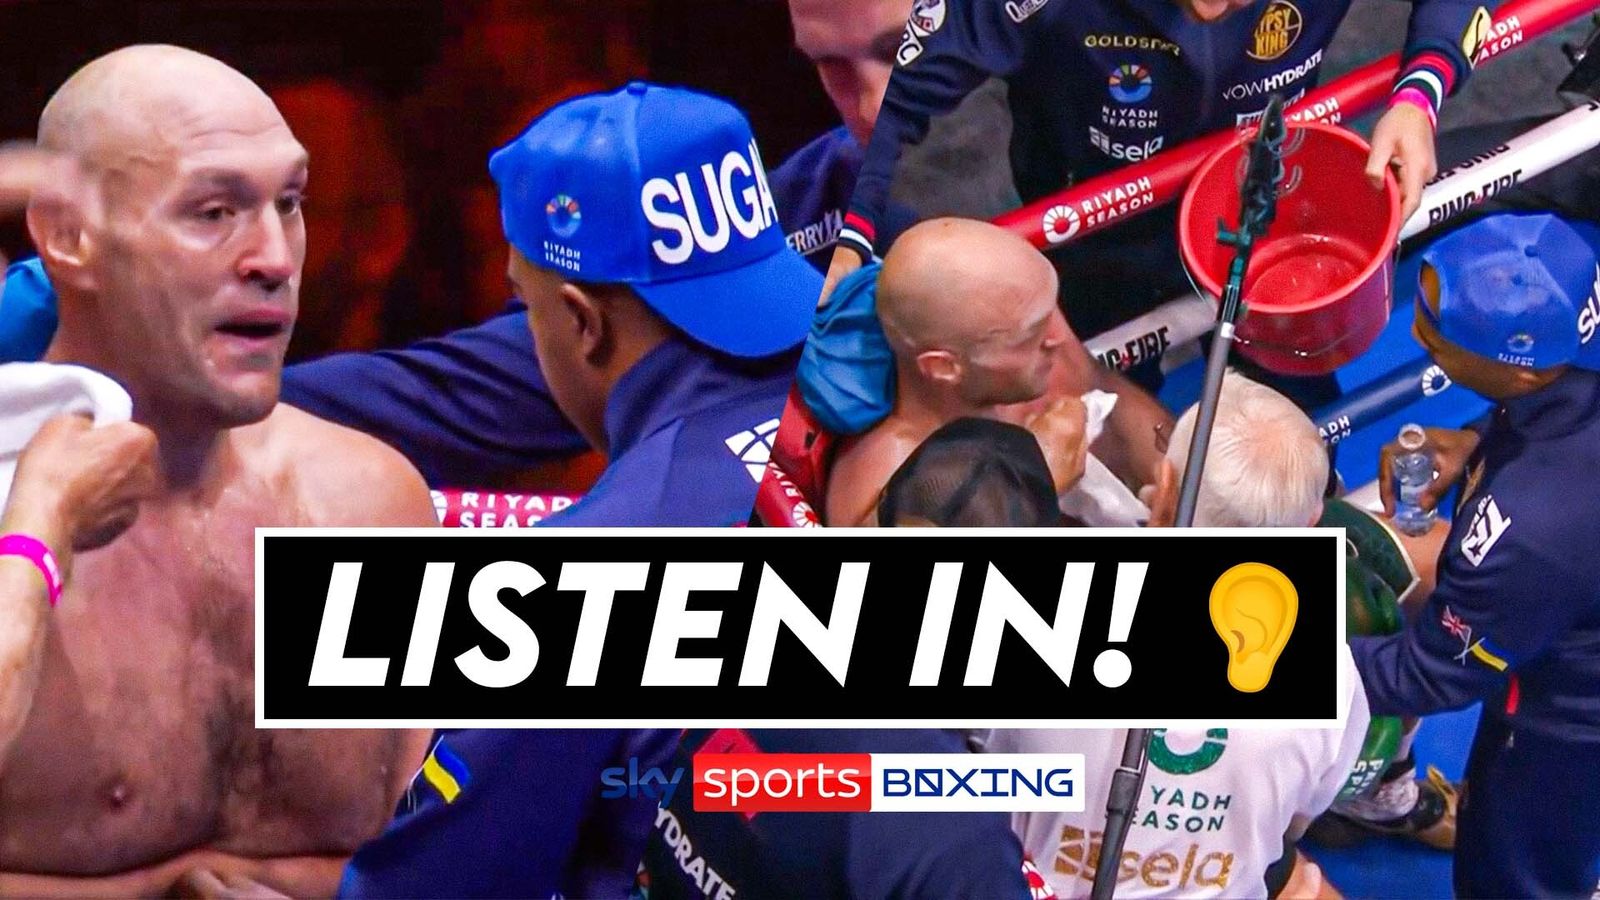 LISTEN IN! Was Fury's corner a help or hindrance?